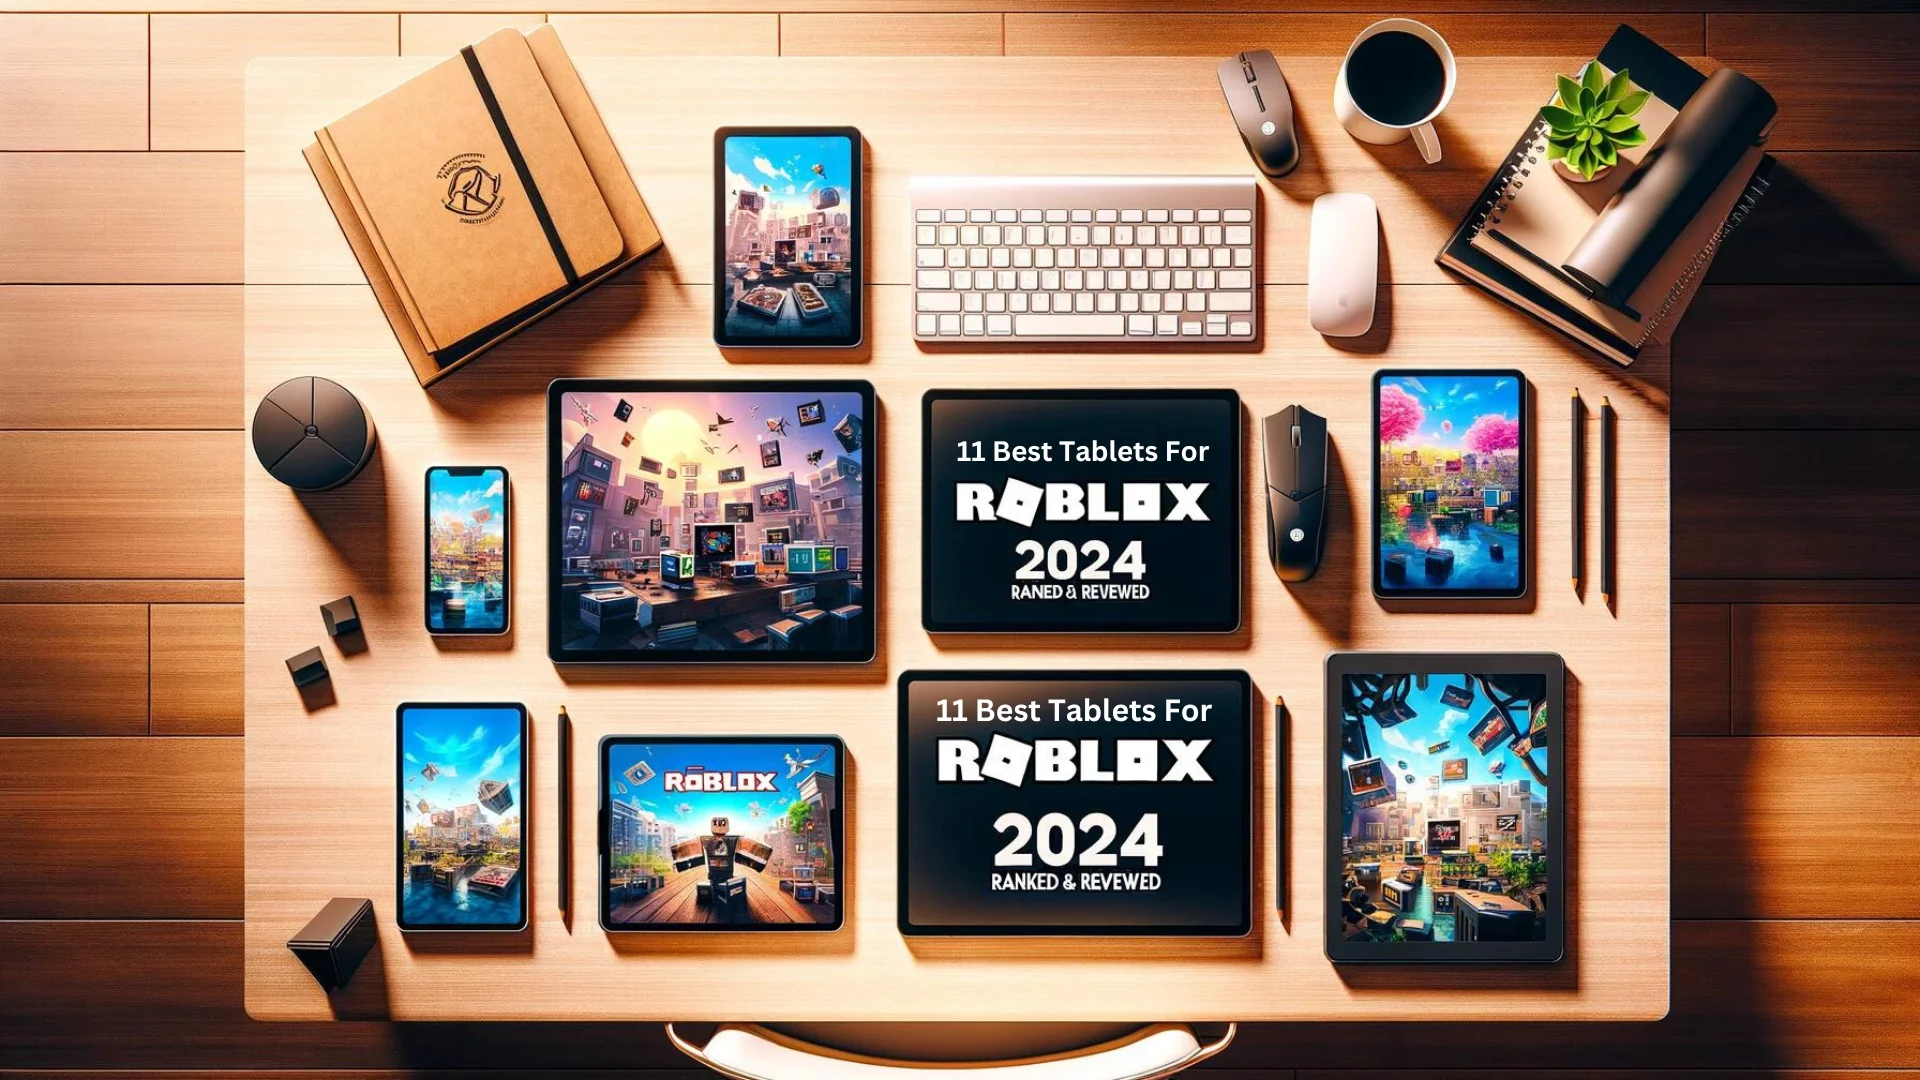 11 Best Tablets For Roblox 2024 [Ranked & Reviewed]